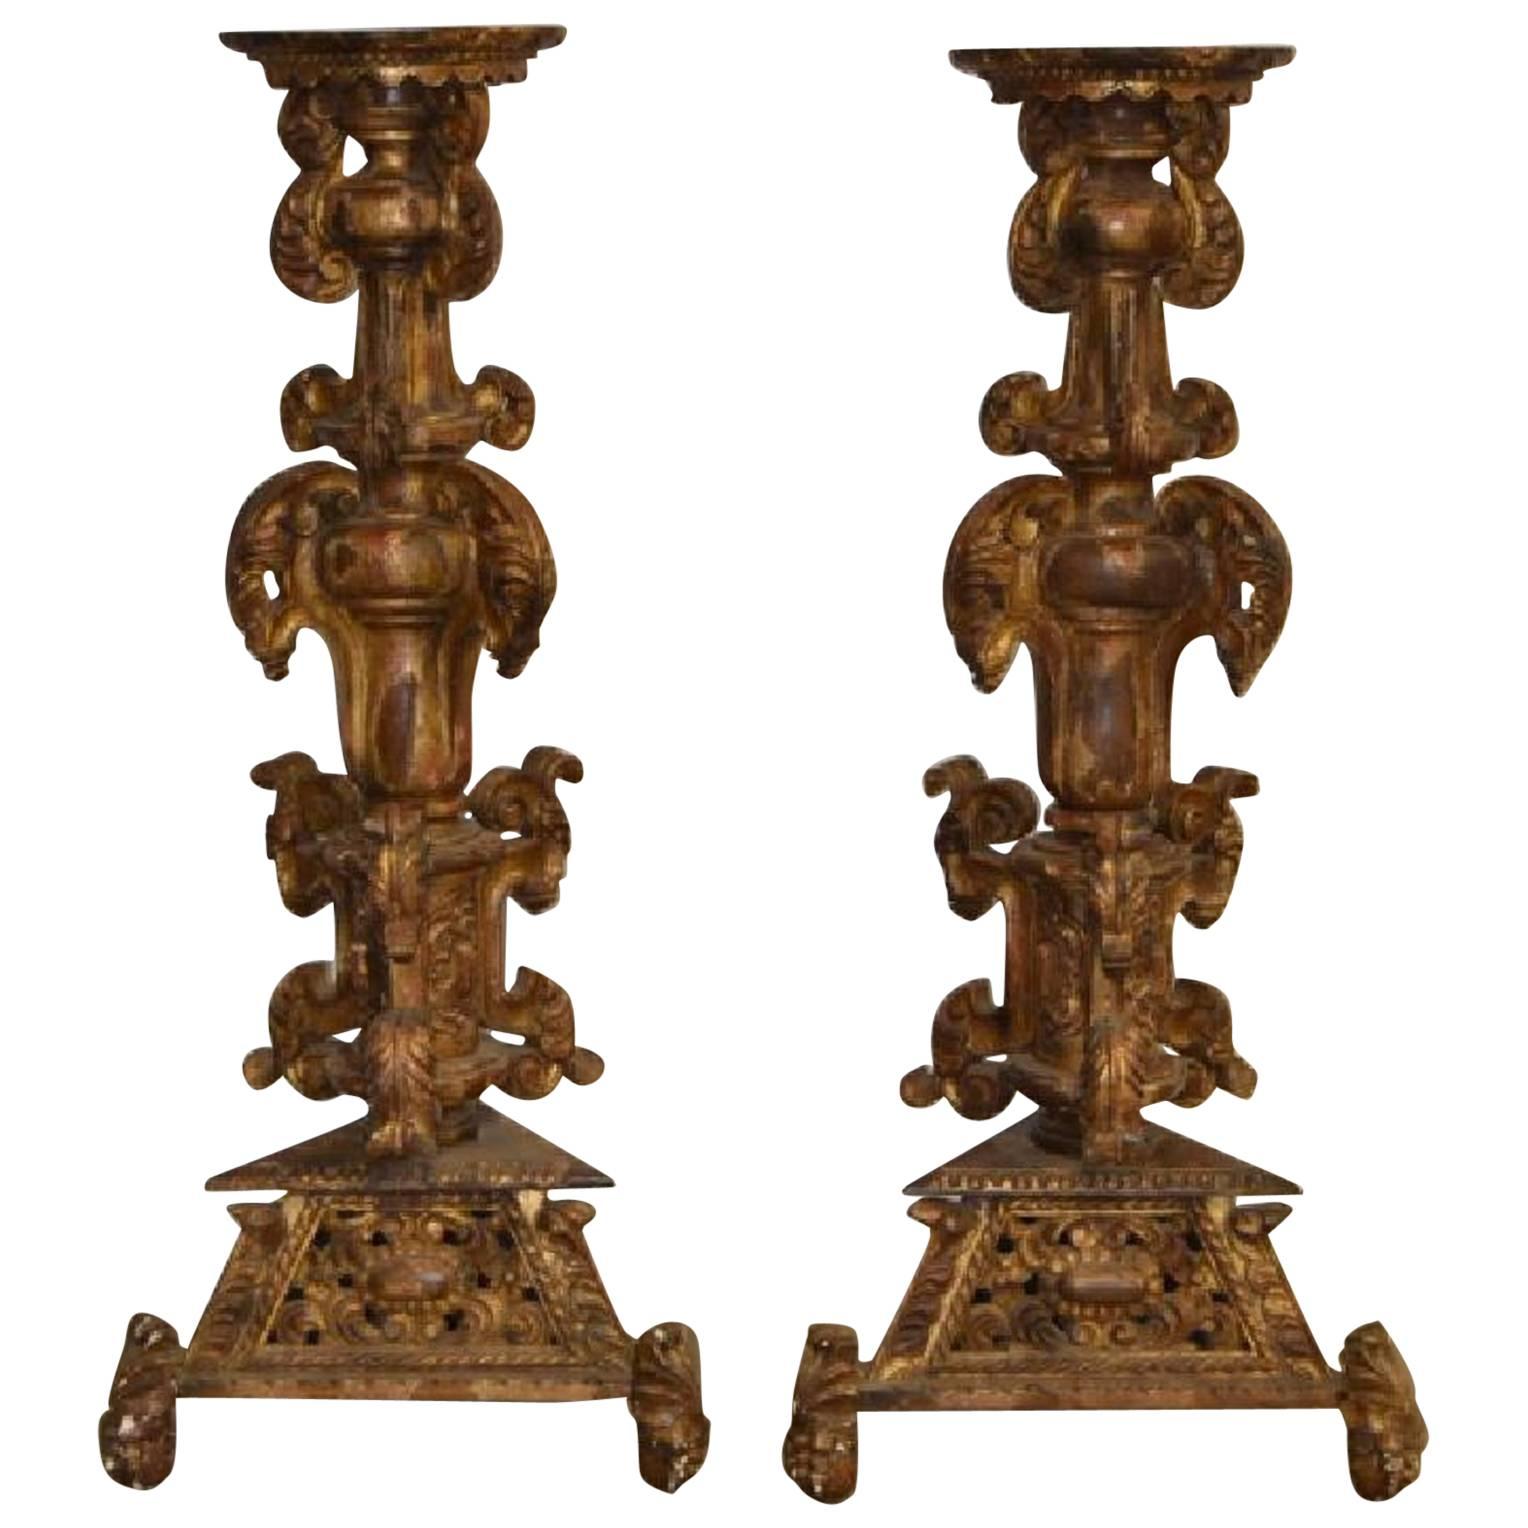 Pair of Monumental Early 19th Century Gold Giltwood and Gesso Pedestals For Sale